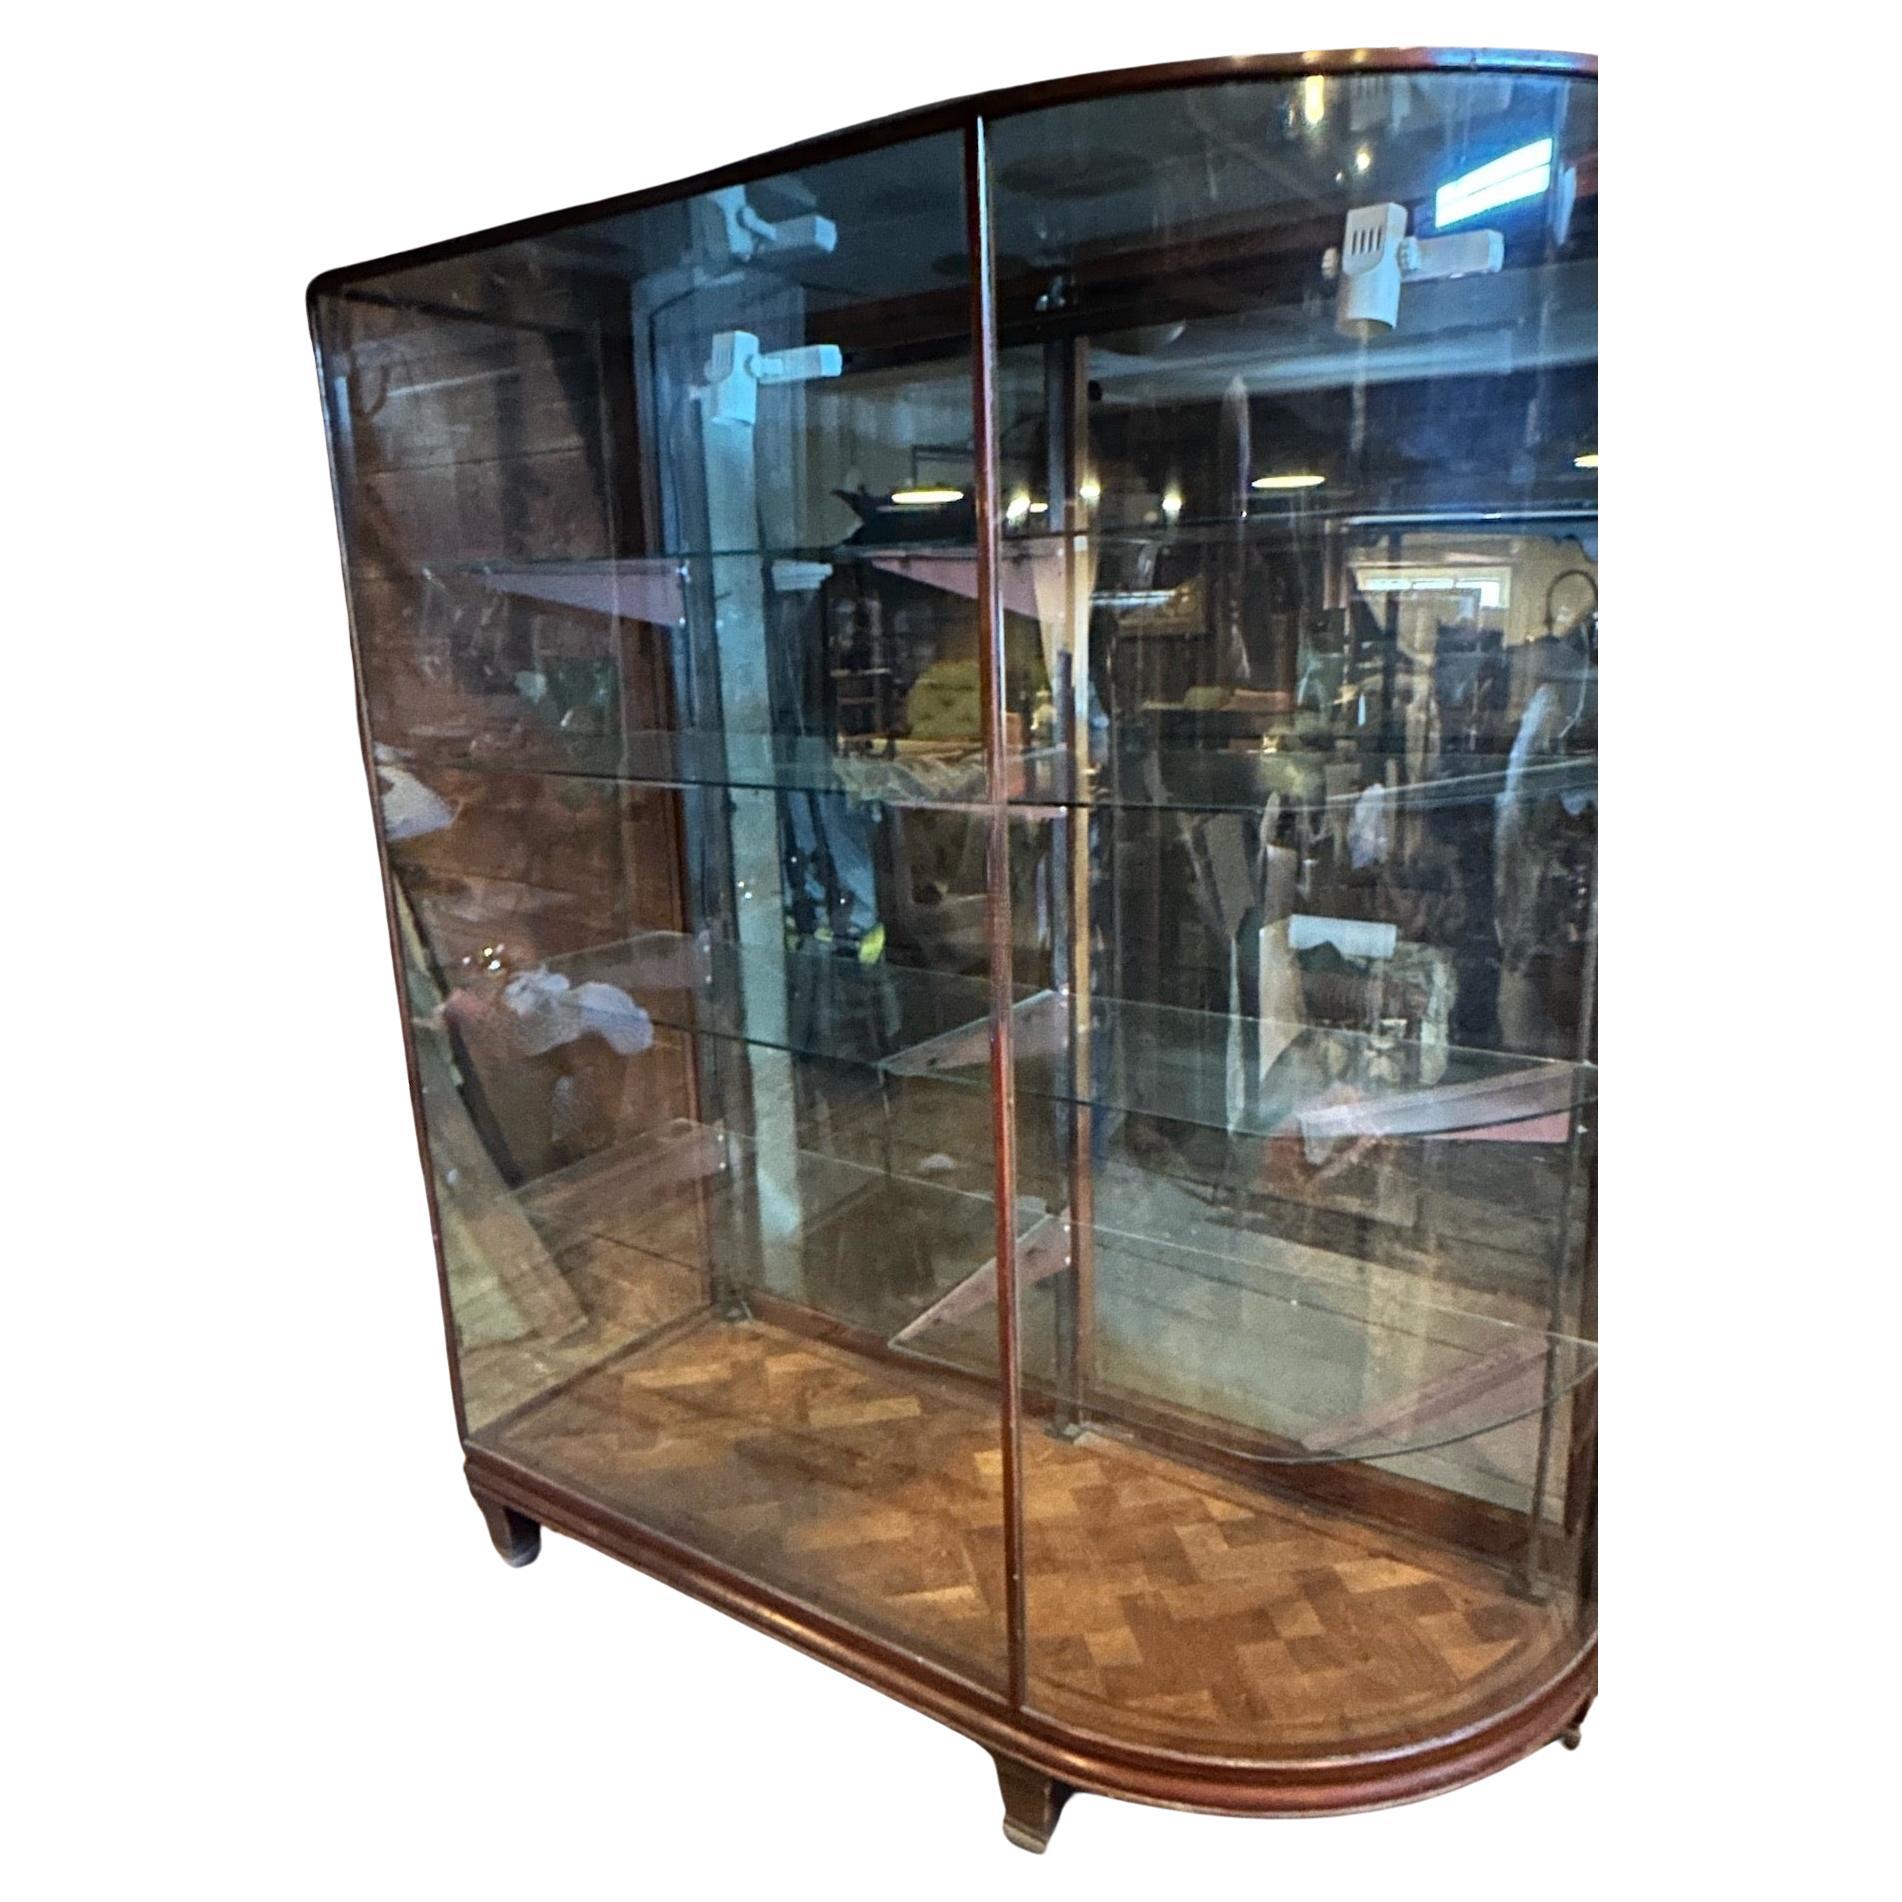 American Classical Pair 19th C Bow Glass Sided Display Cabinets from an Upscale Boston Fashion Shop